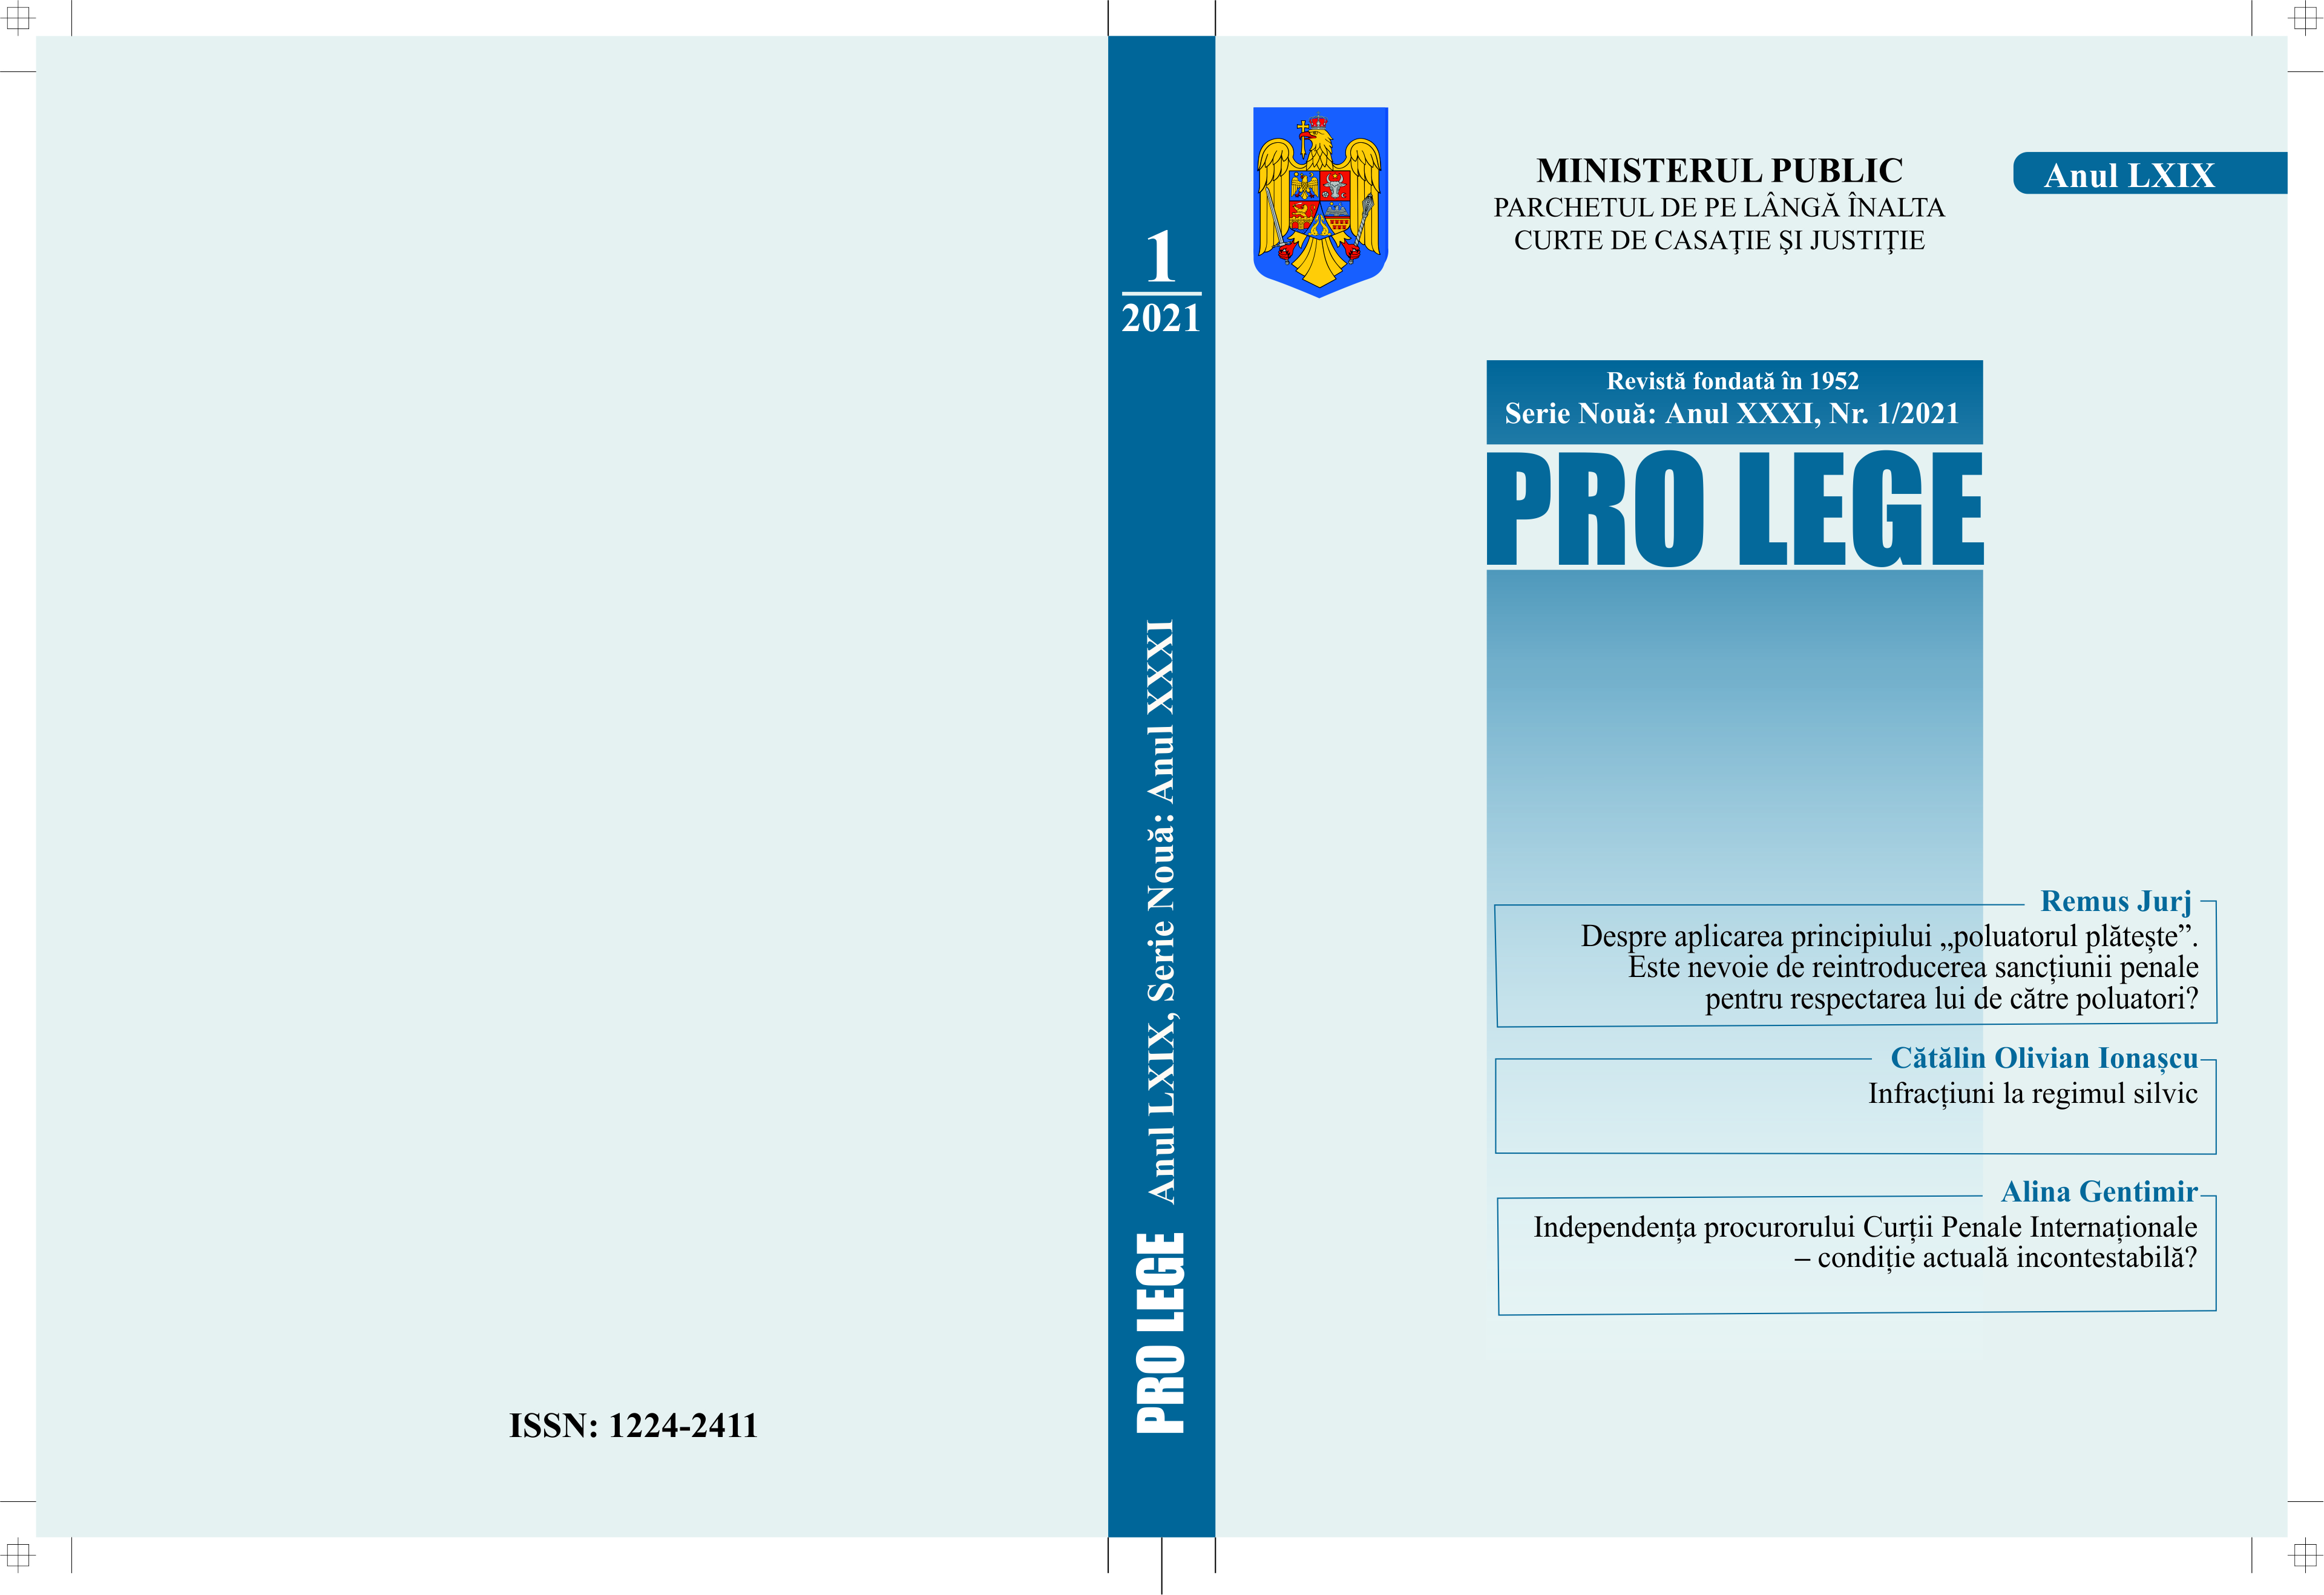 From the practice of the Galați Court of Appeal Cover Image